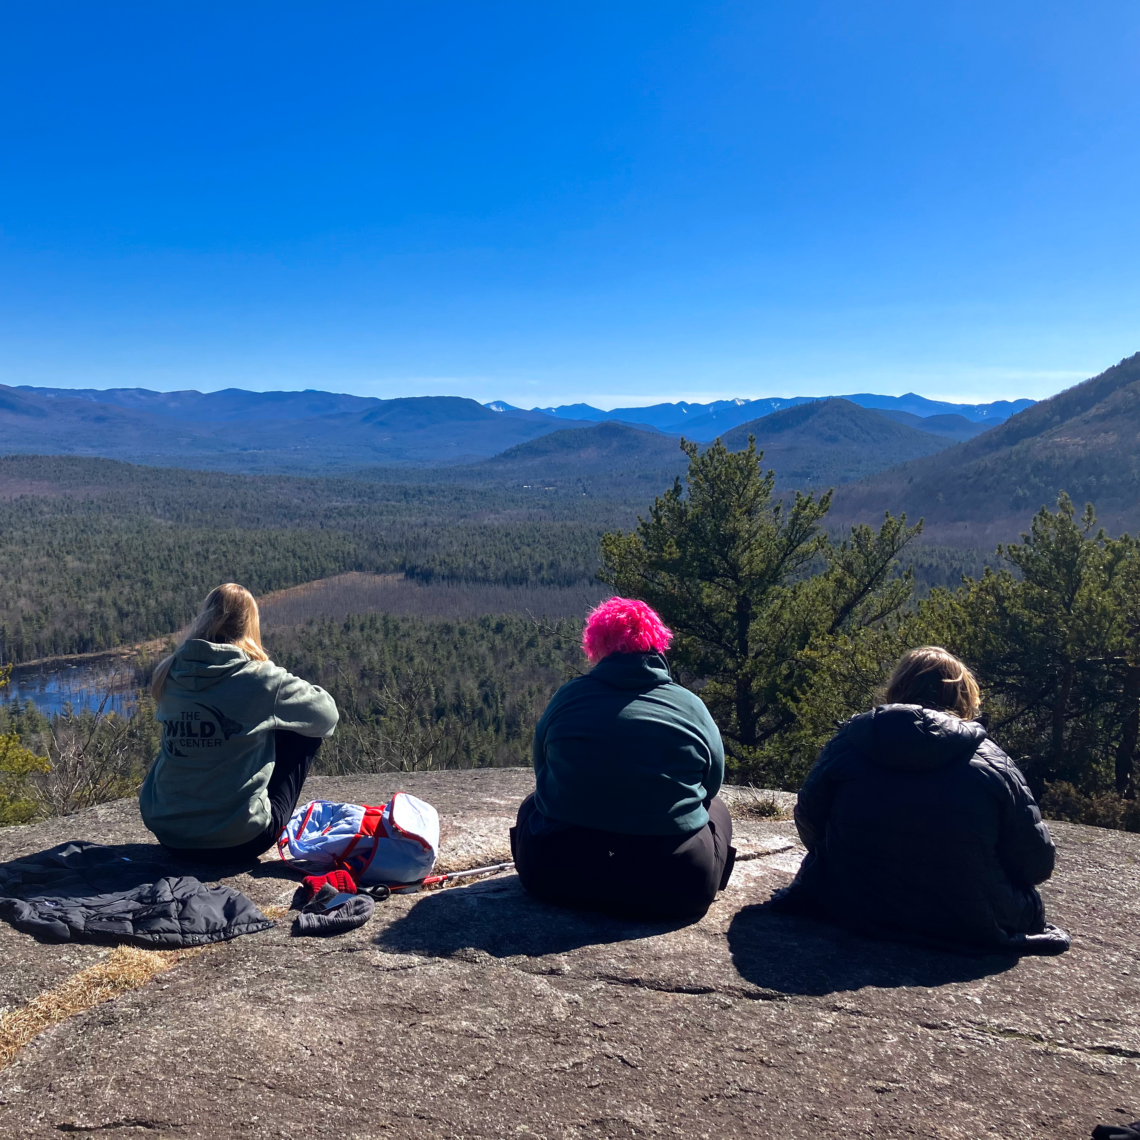 Three students and teachers sit atop a mountain, admiring the view of the valley below under a brilliant blue sky.